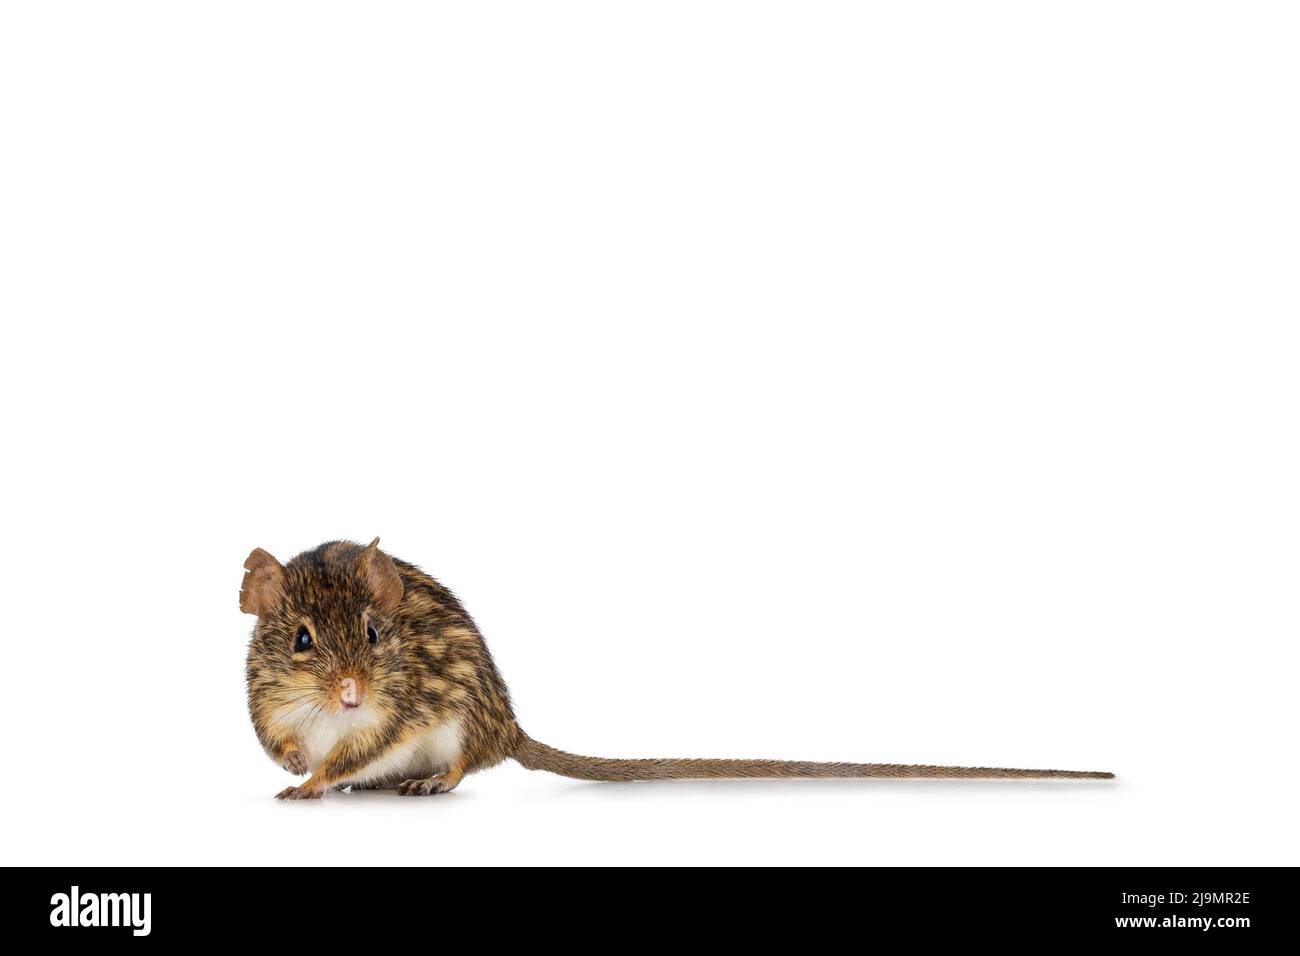 Striped grass mouse, sitting facing front. Looking towards camera showing two eyes. Isolated on a white background. Stock Photo